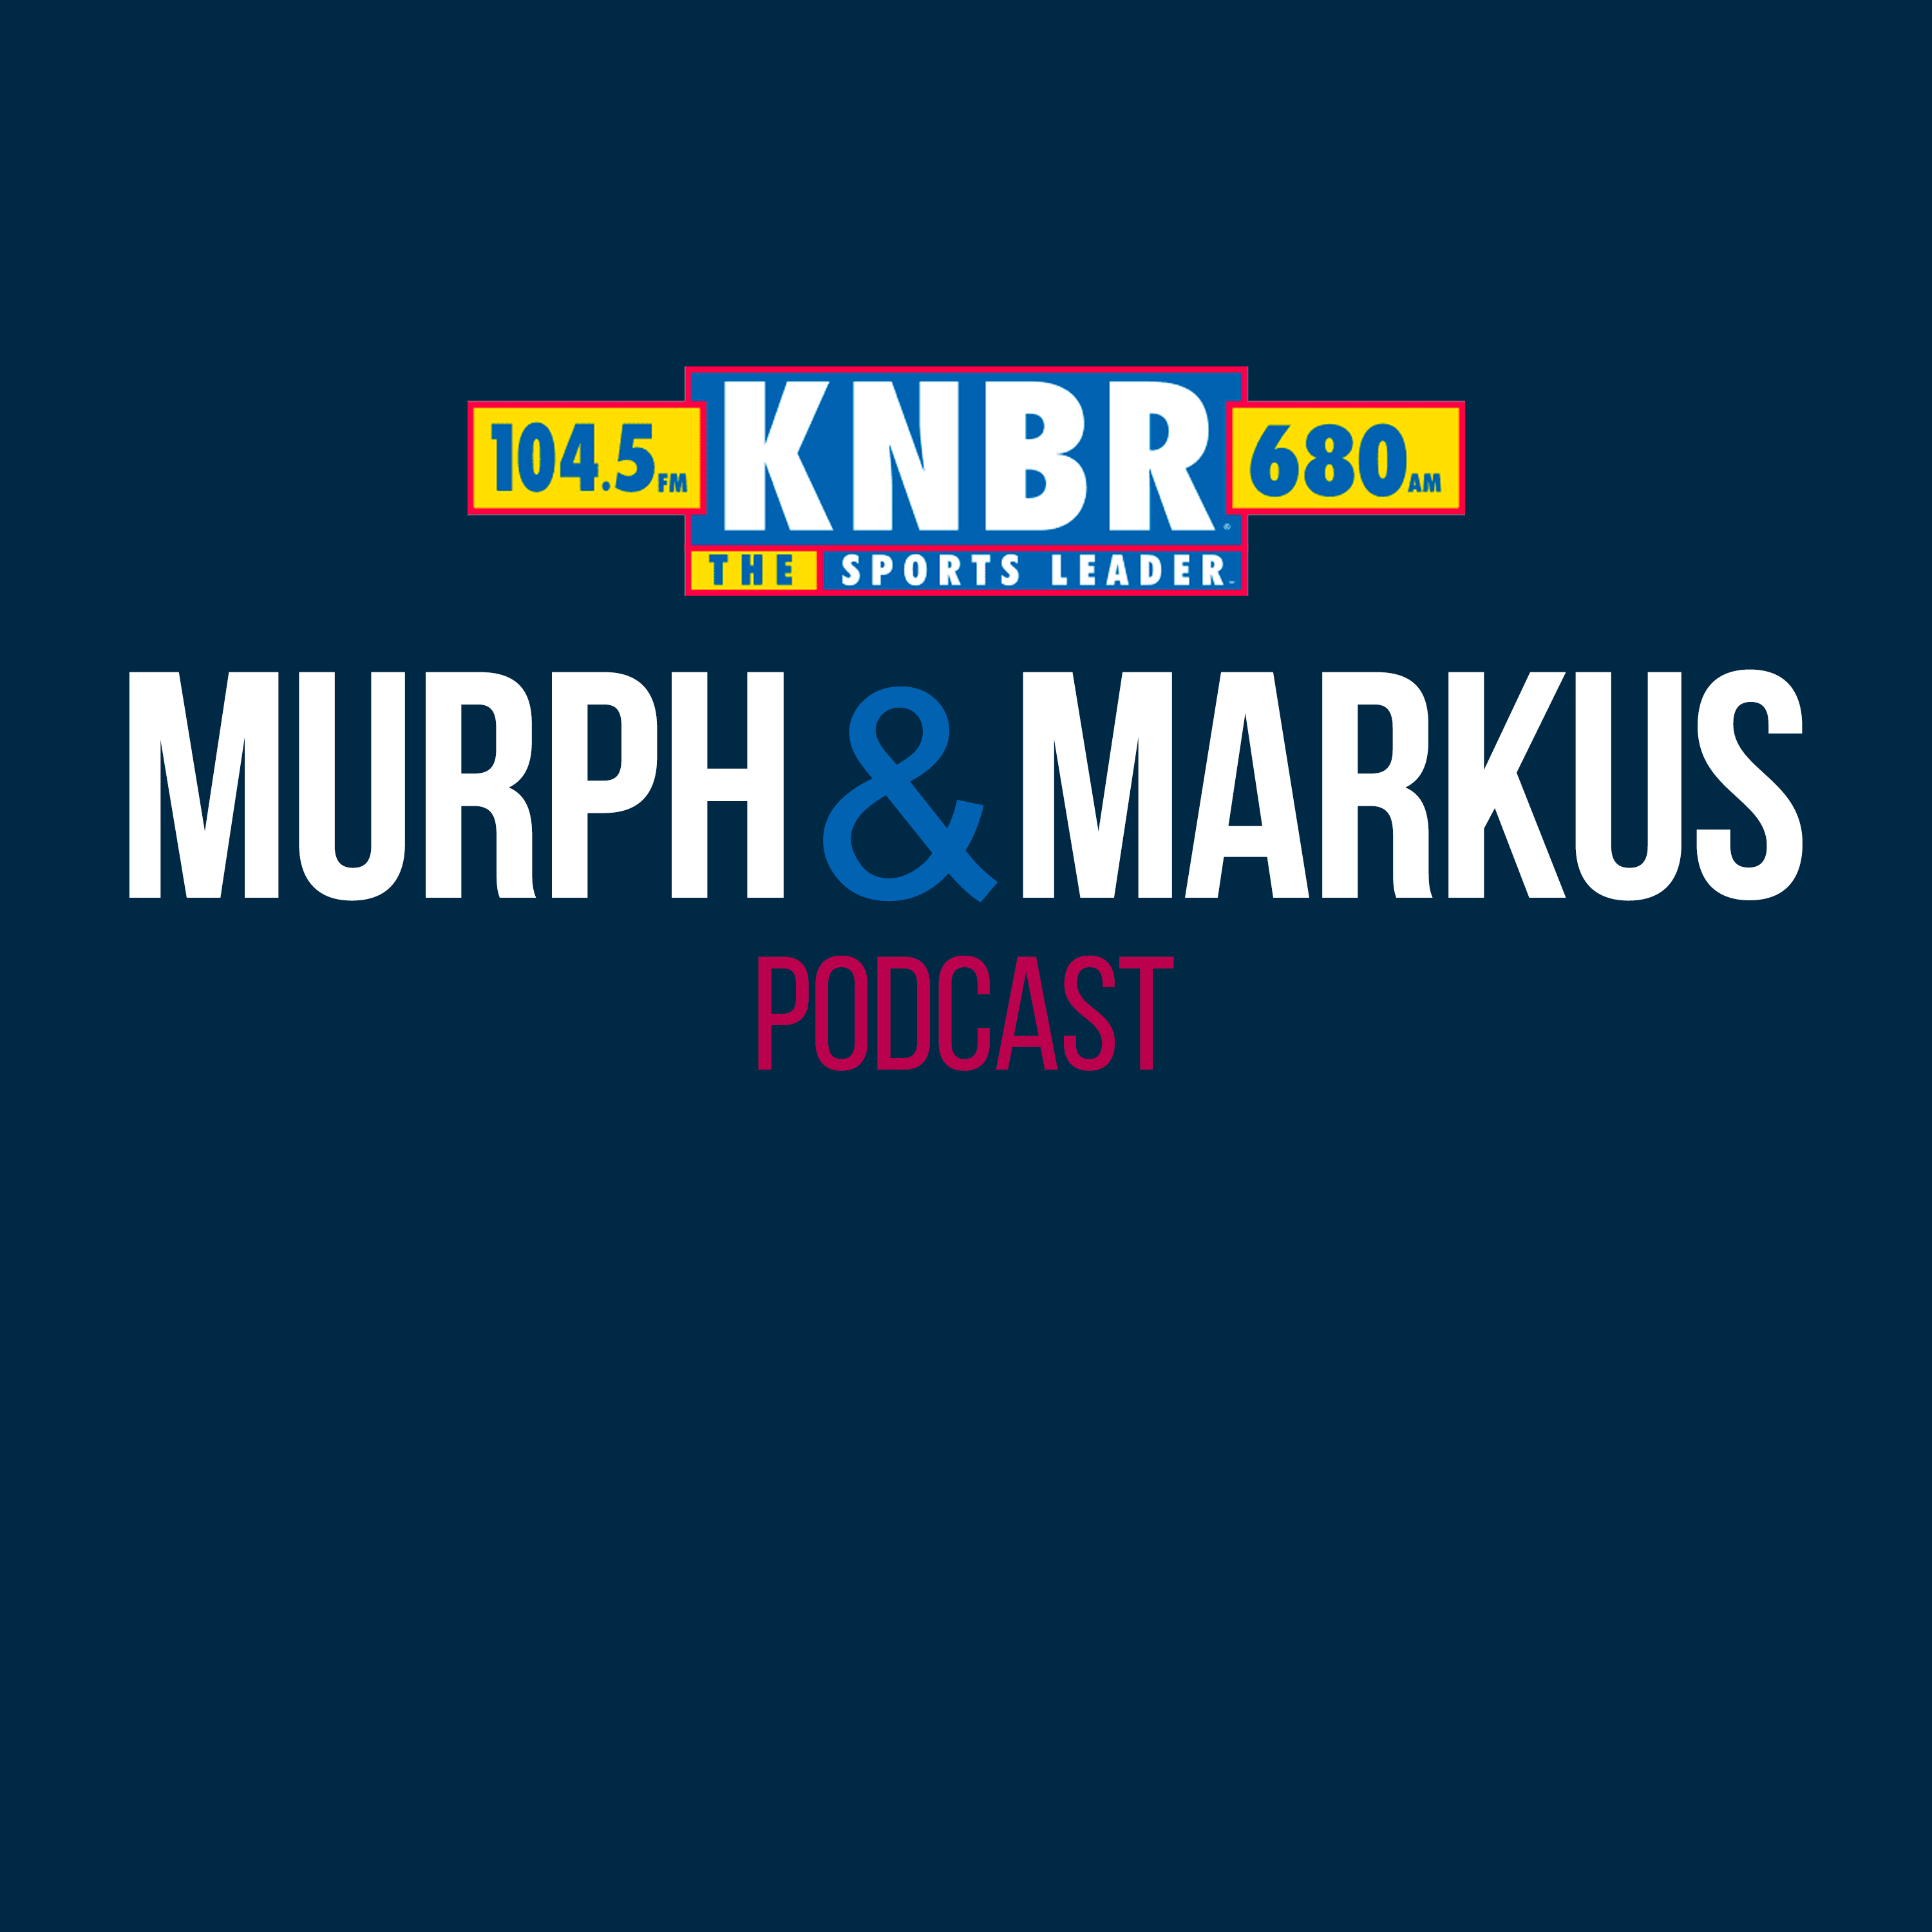 5-16 KNBR 49ers insider, Matt Maiocco joined Murph and Markus to discuss the 49ers schedule and recap the offseason moves